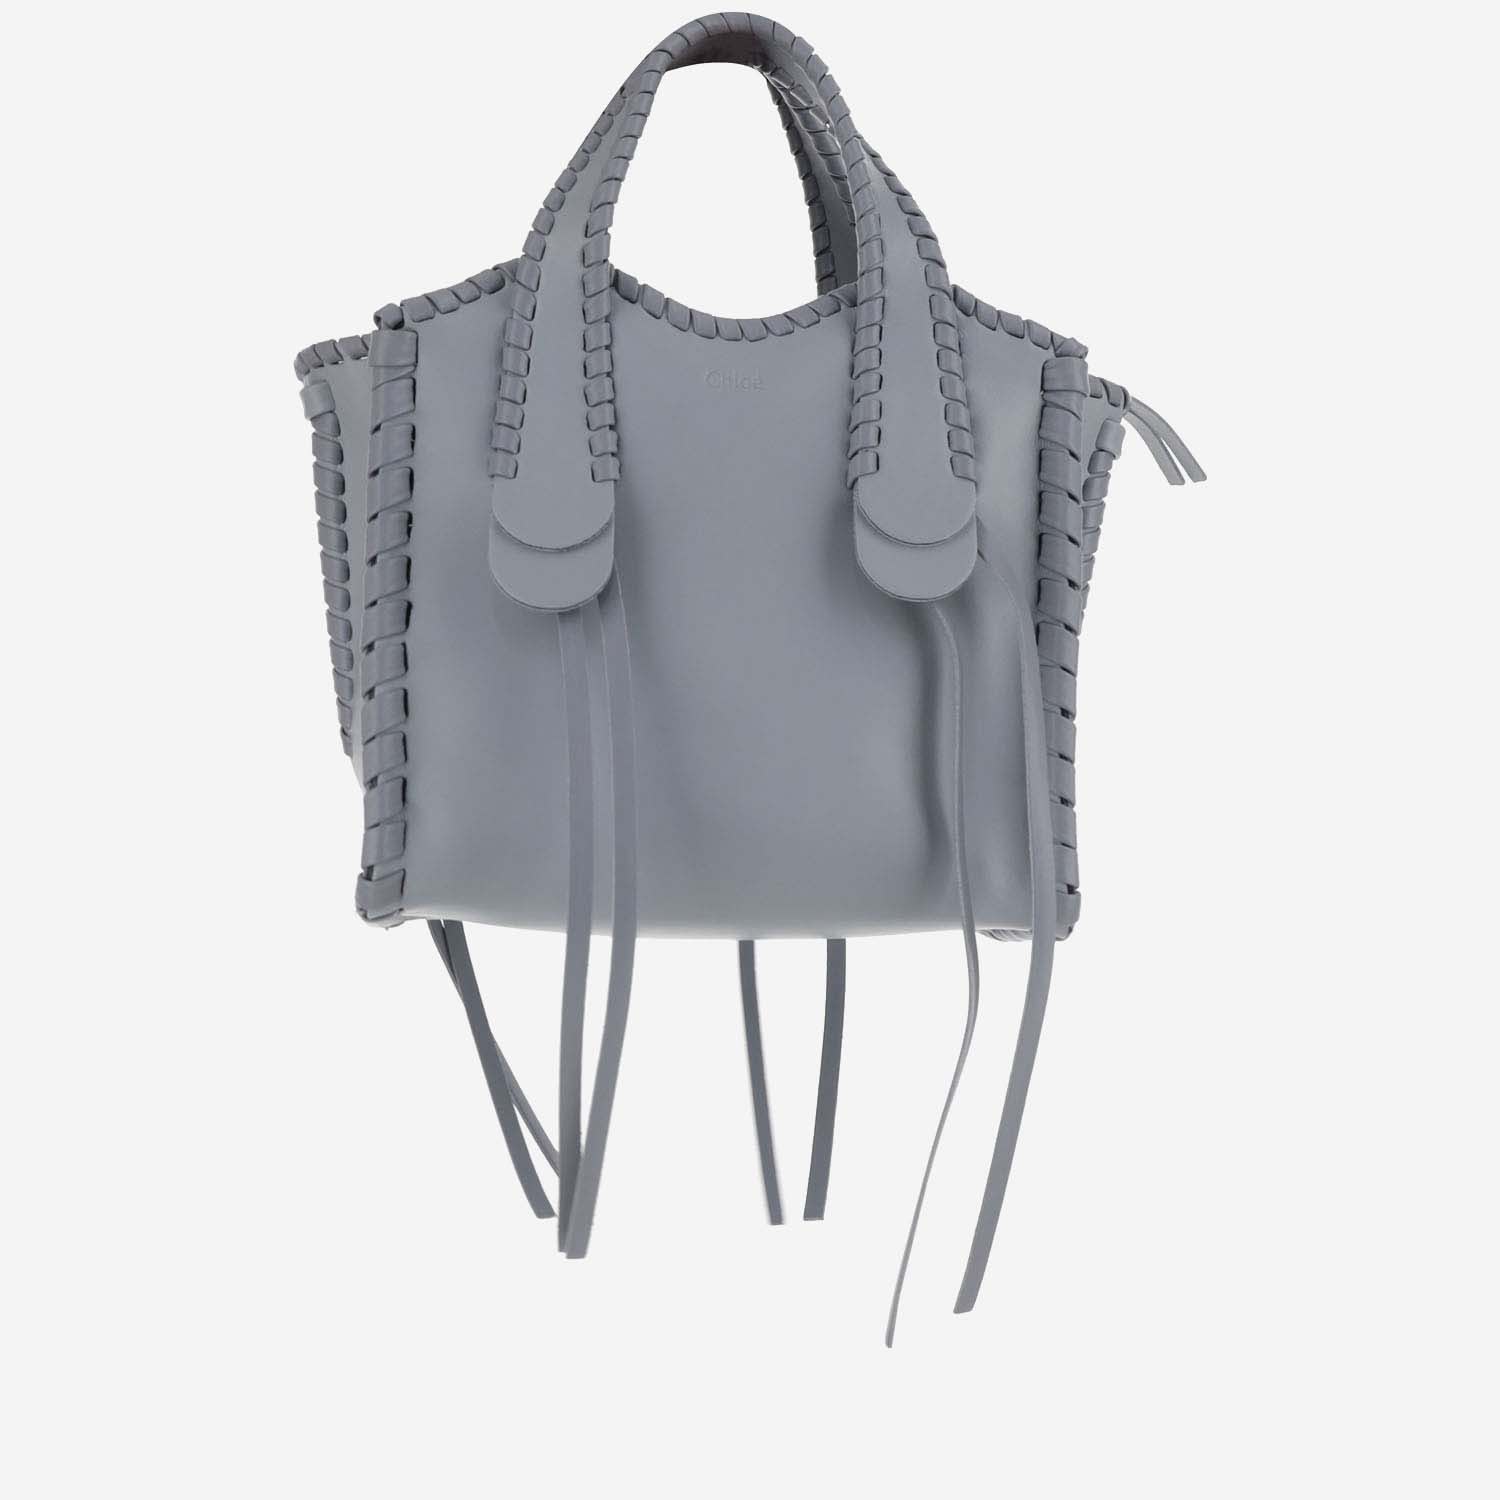 Chloé Mony Tote Bag Small Size In Storm Blue